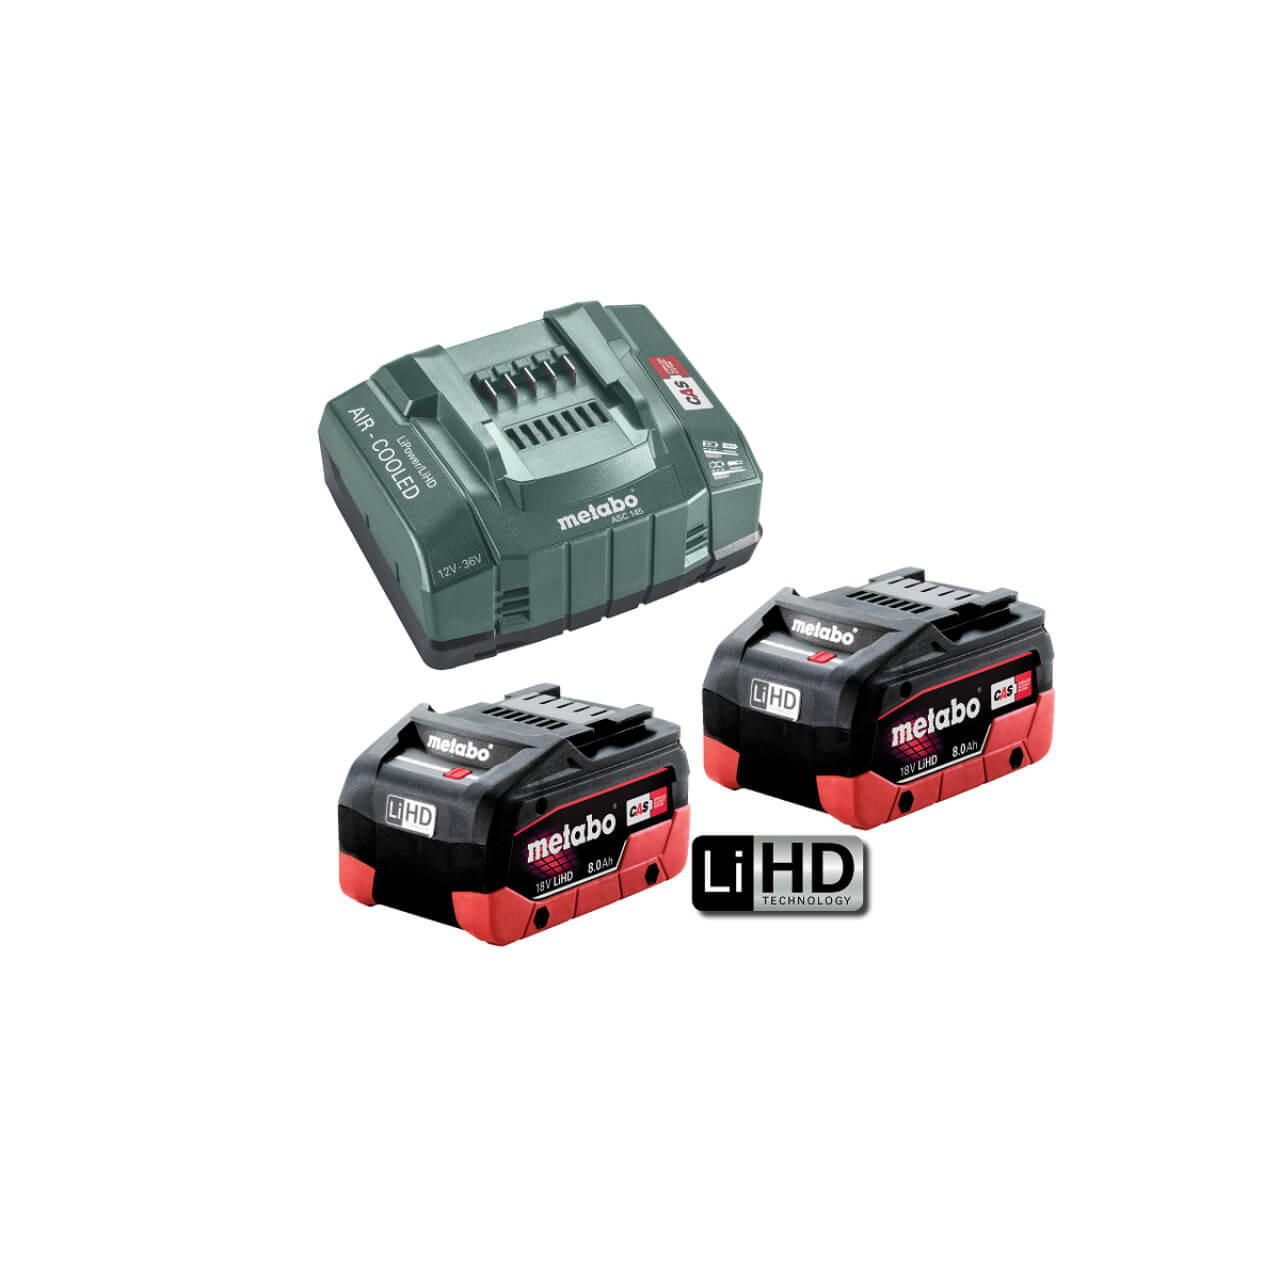 Metabo 8.0 LiHD 145 KIT 18V LiHD ASC 145 Starter Pack 2 x 8.0 Ah(2 x 18V 8.0 Ah LiHD Battery Packs 1 x ASC 145 Super-fast Air-cooled Charger)